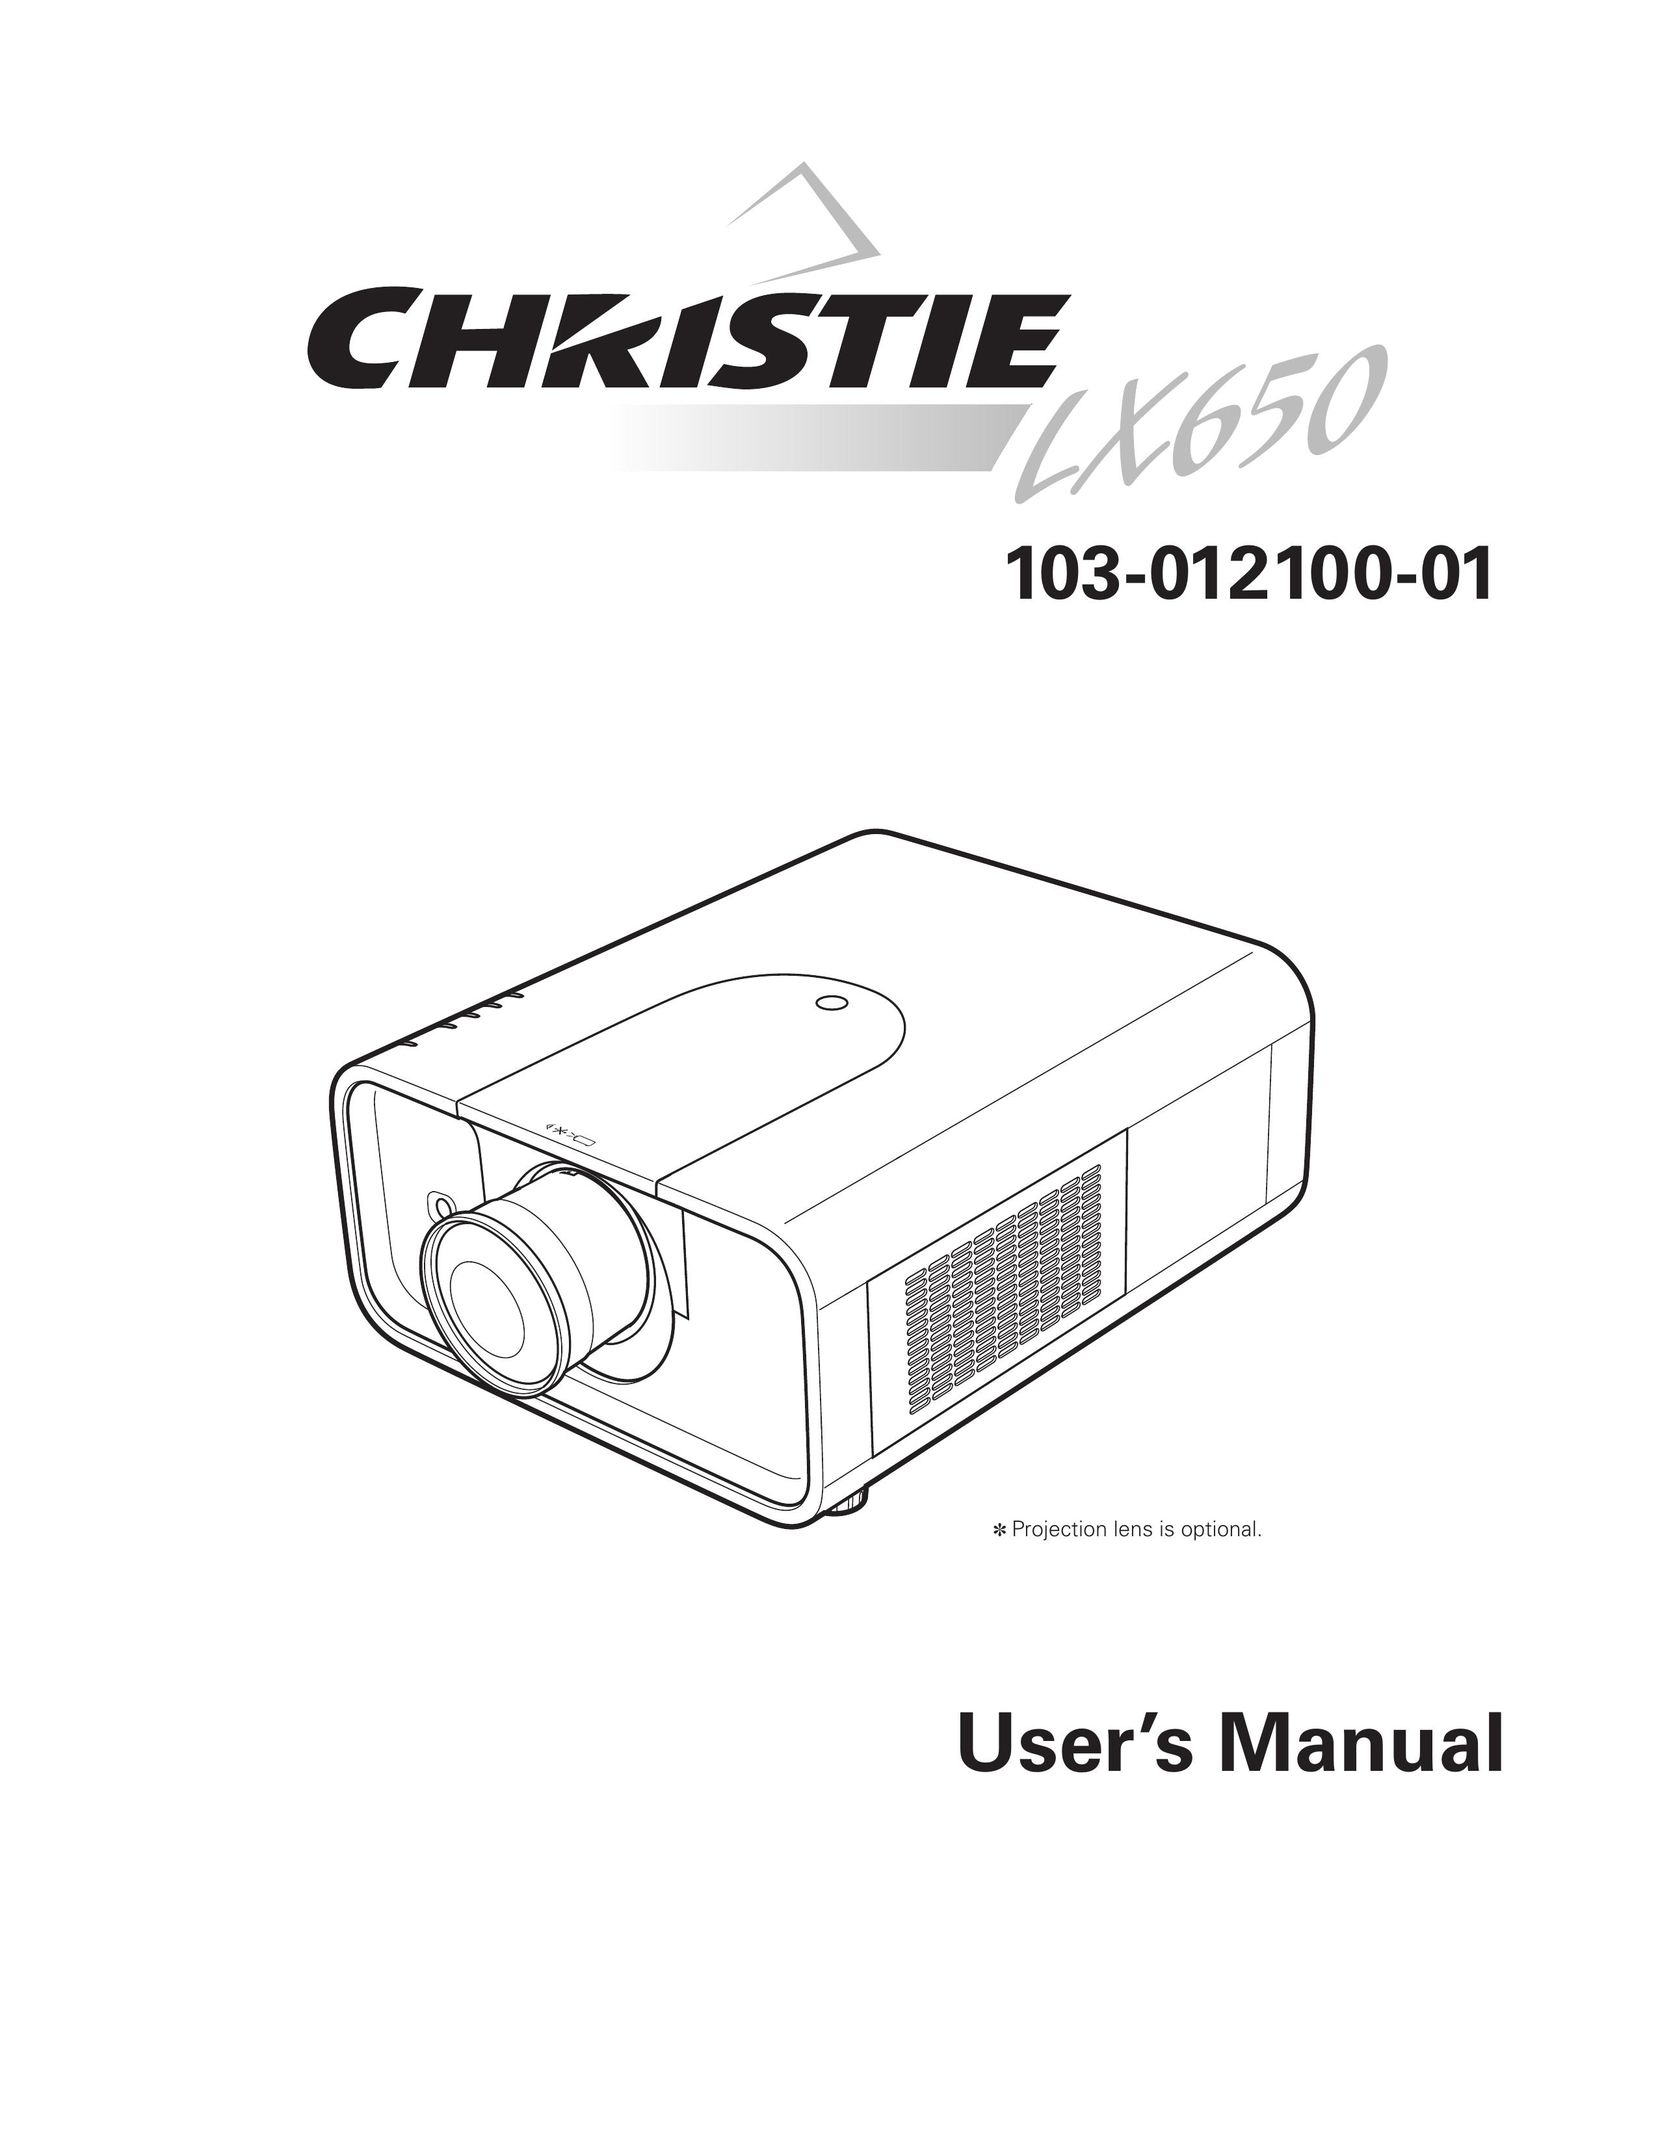 Christie Digital Systems 103-012100-01 Projector User Manual